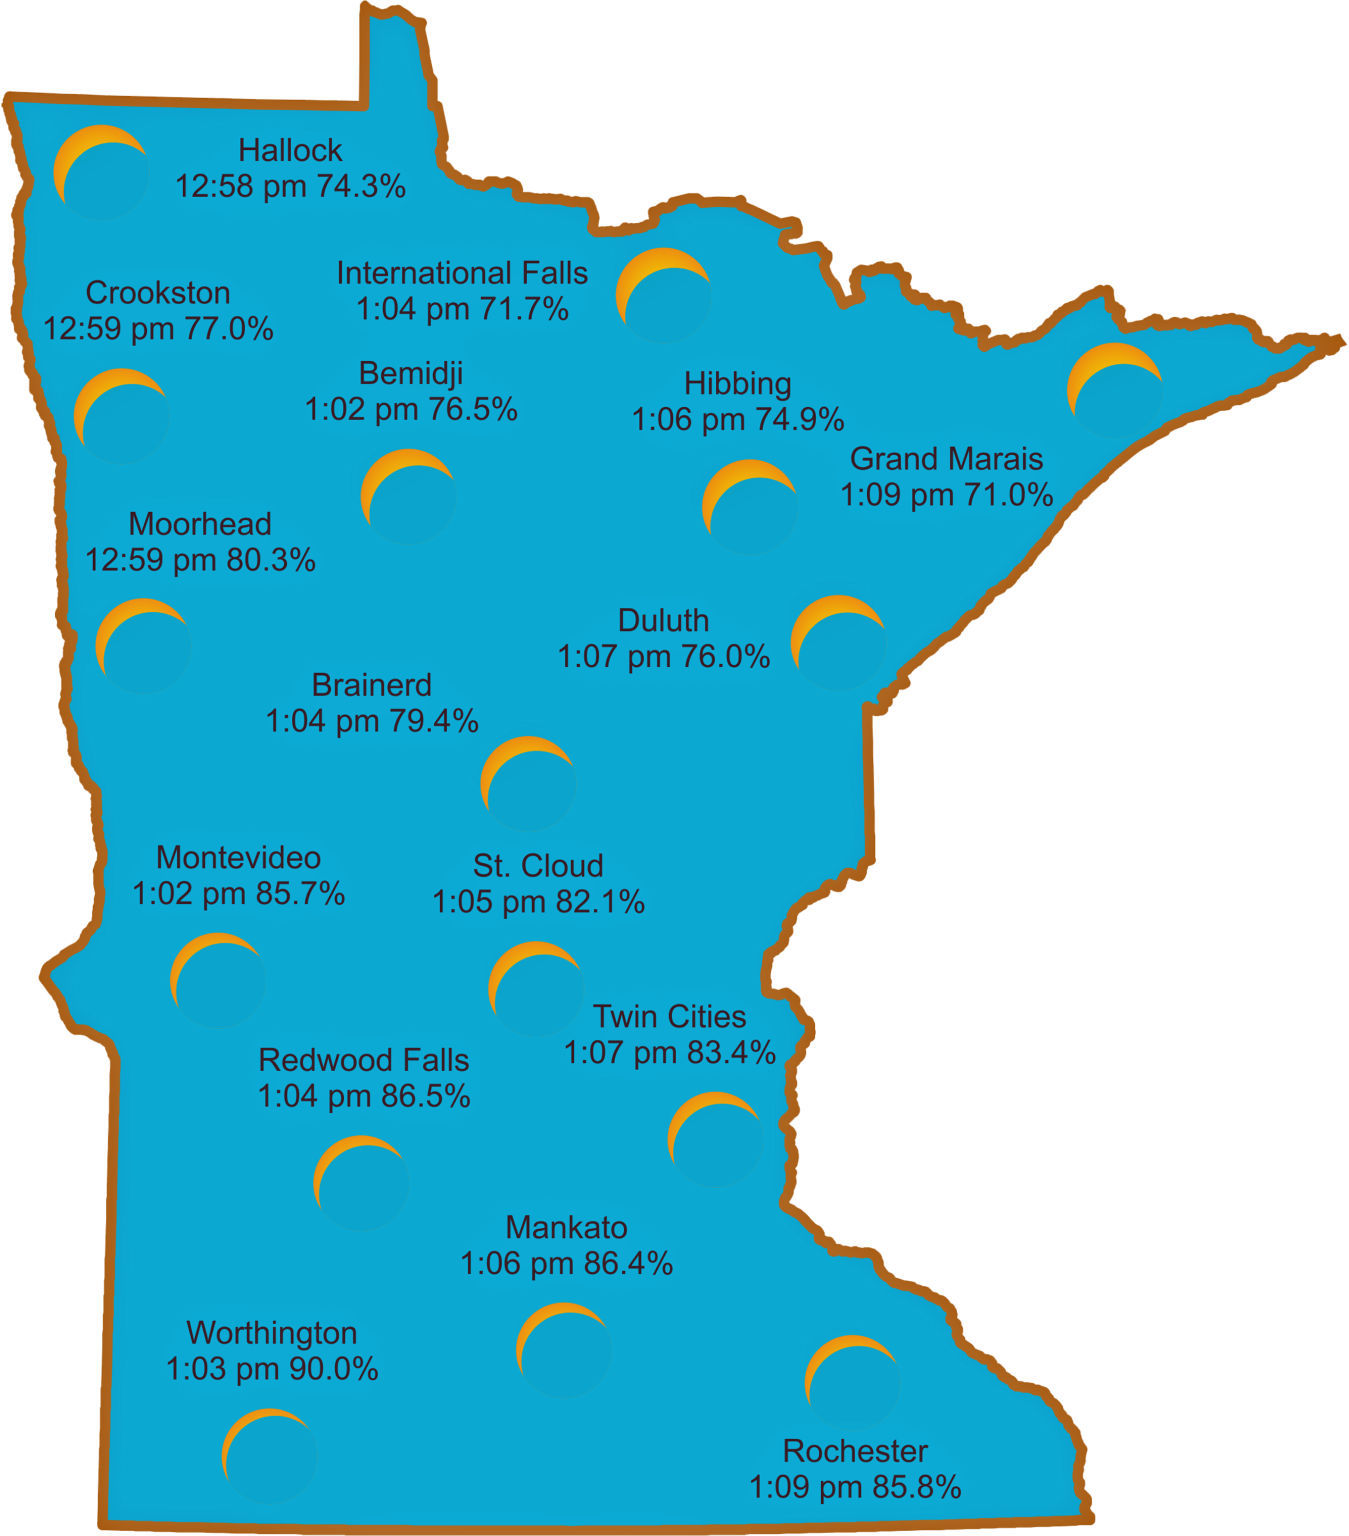 how to see the eclipse in minnesota